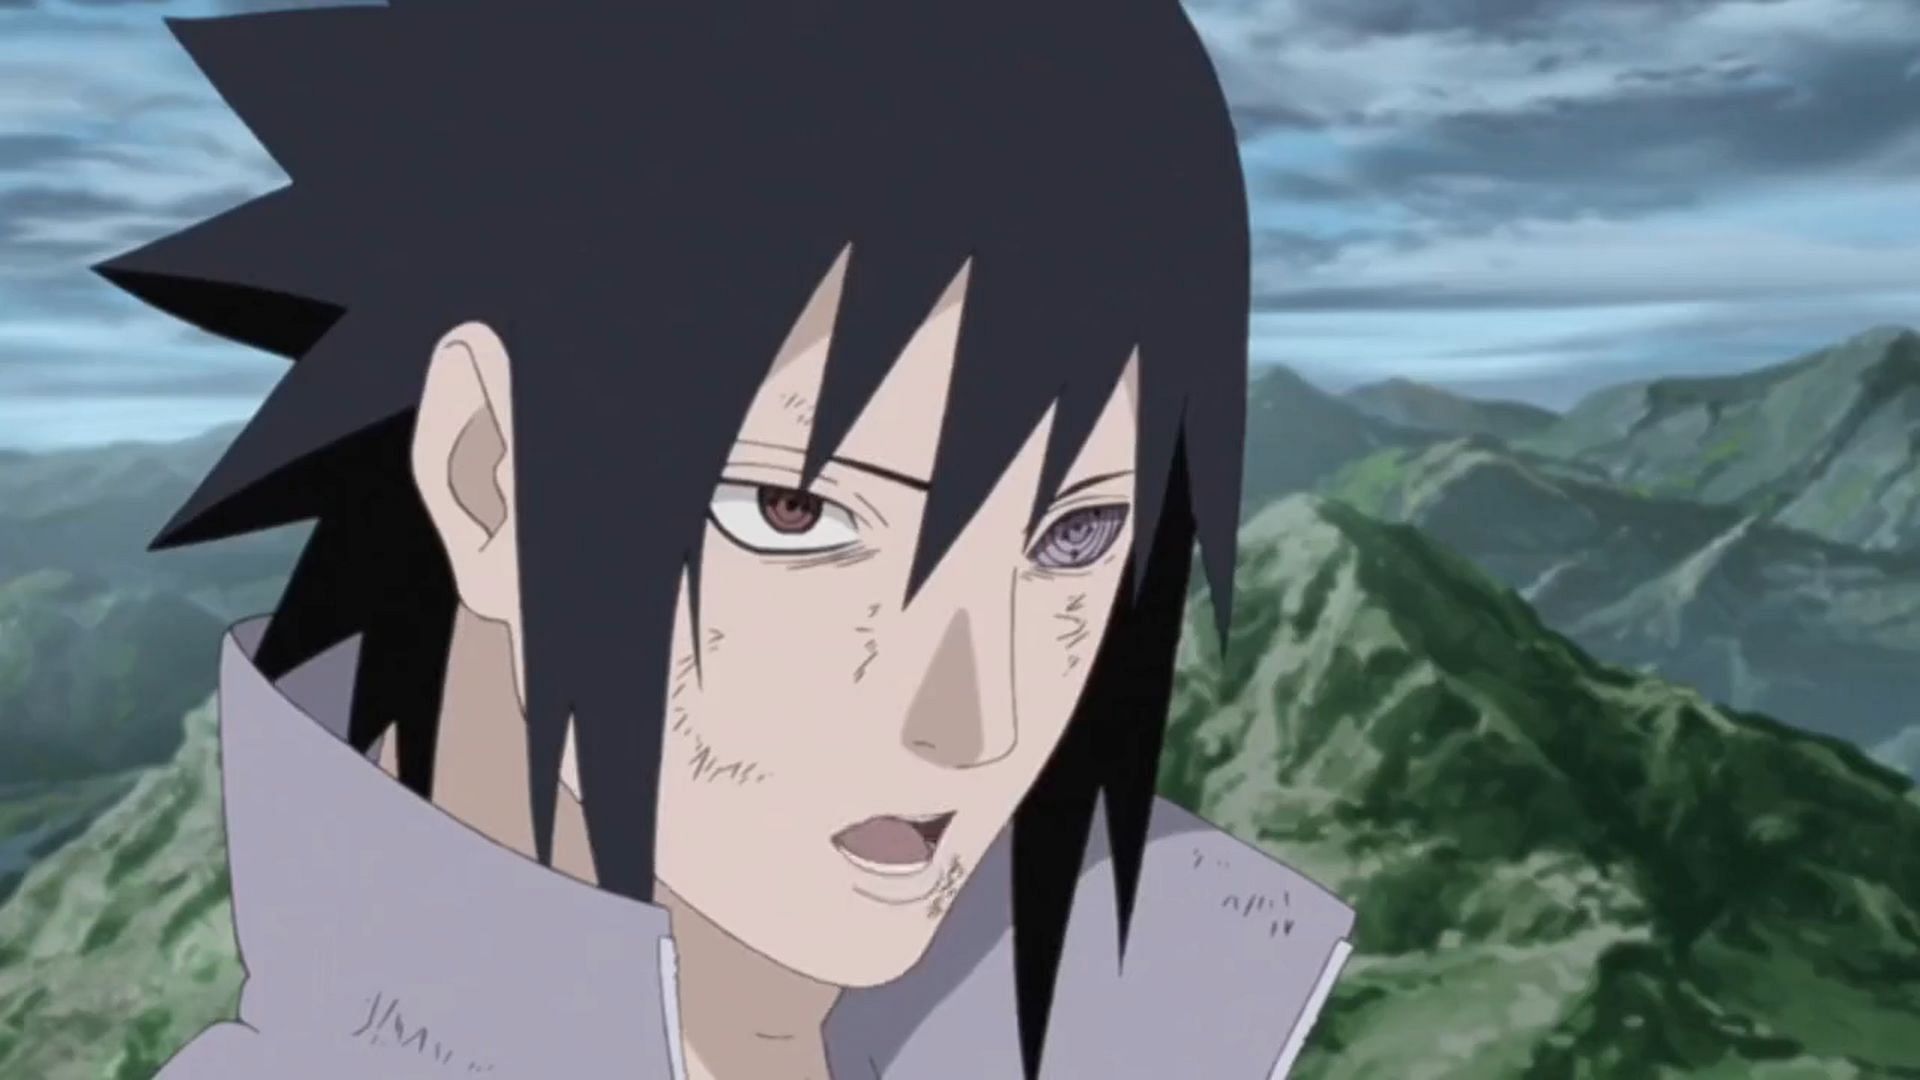 Sasuke Uchiha during his fight at the Valley of the End (Image via Studio Pierrot)